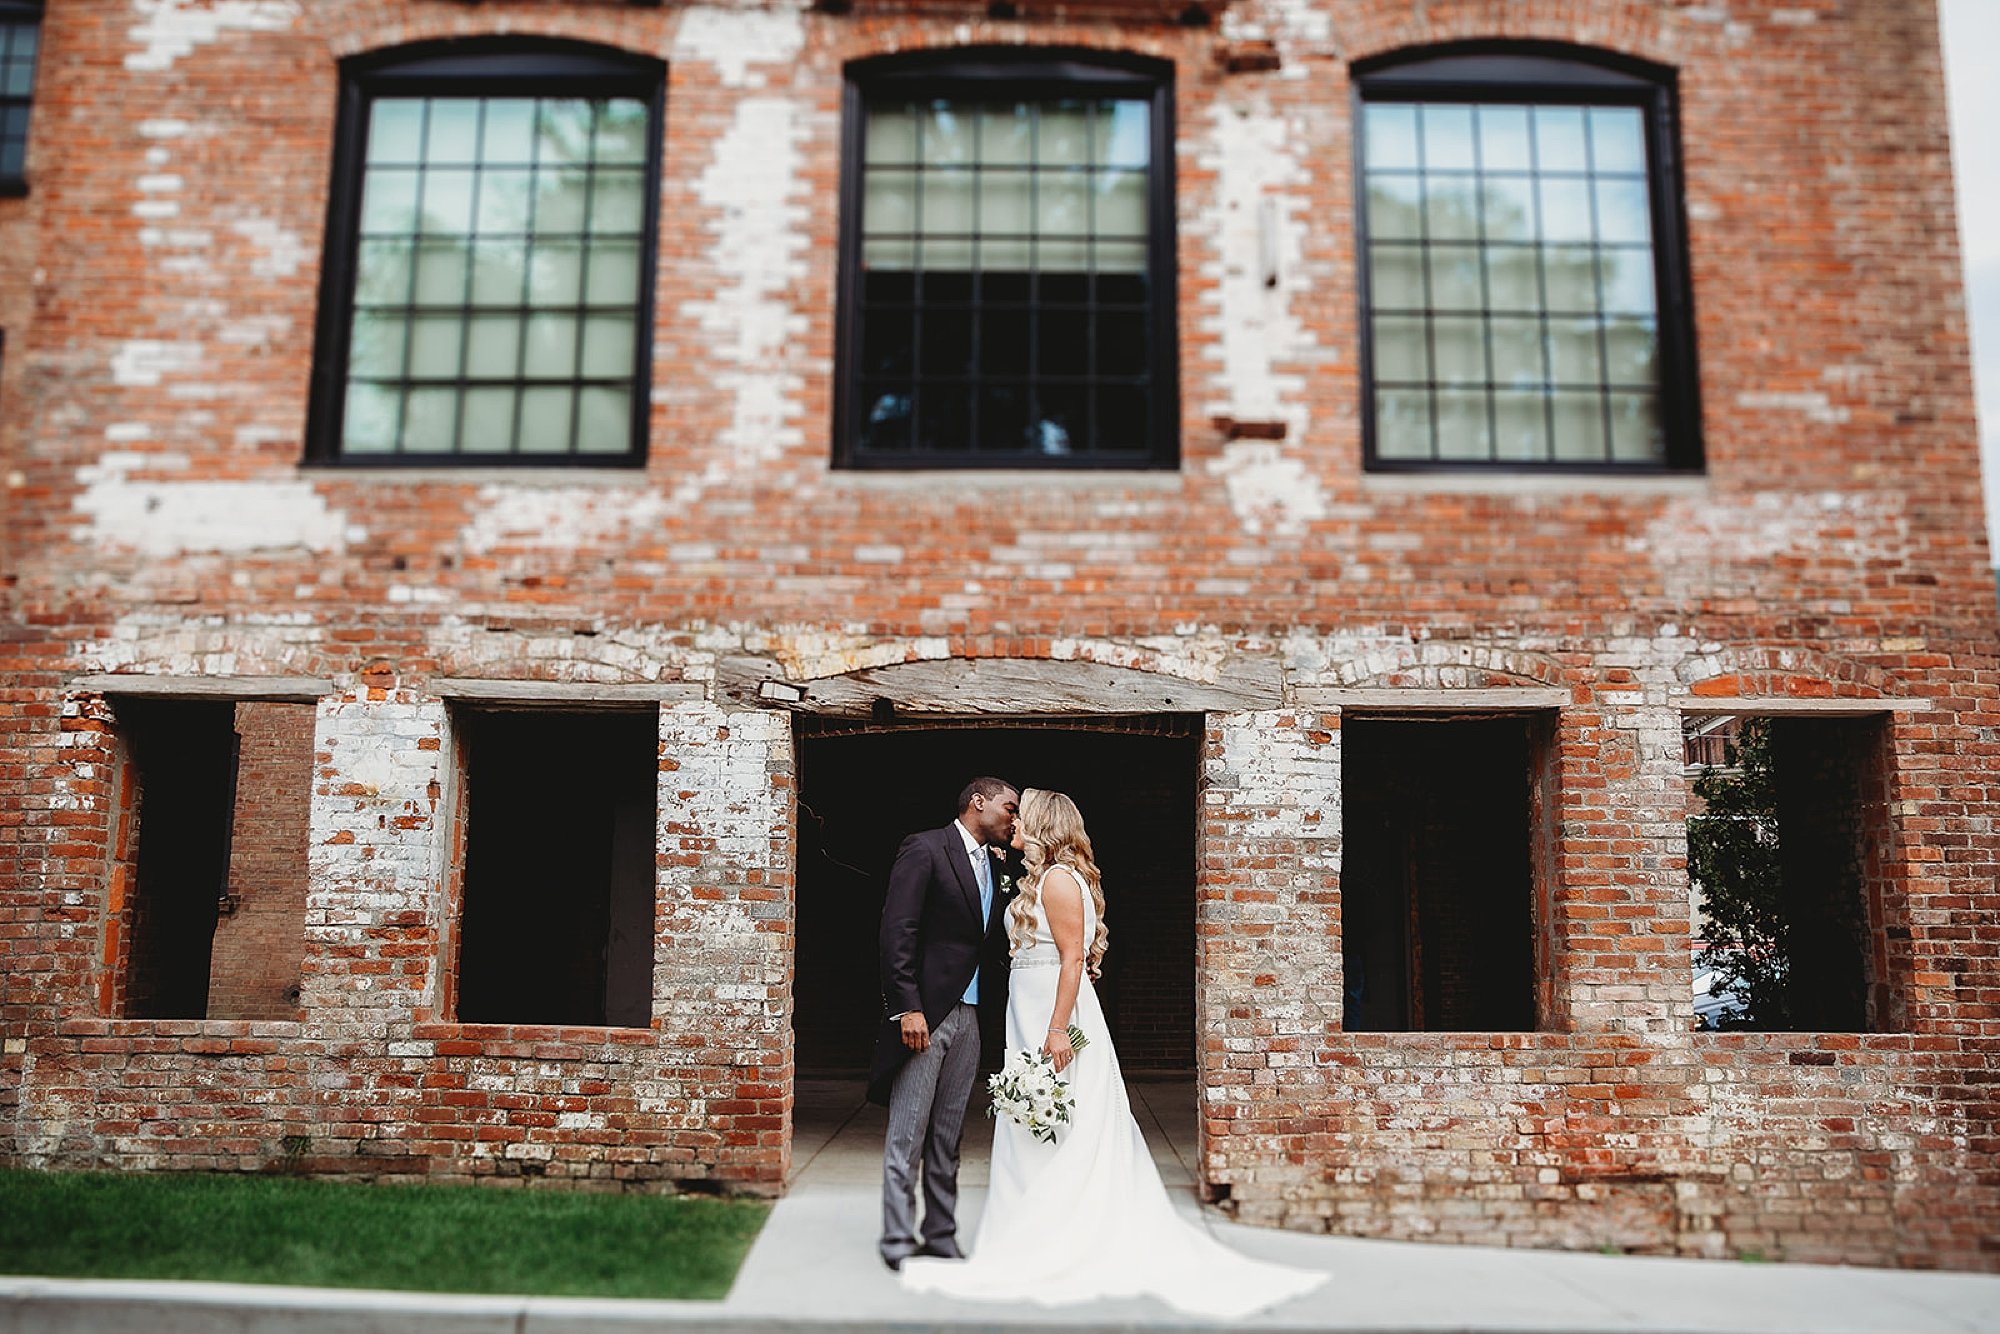 newlyweds kiss in front of brick building with glass windows at The Roadhouse